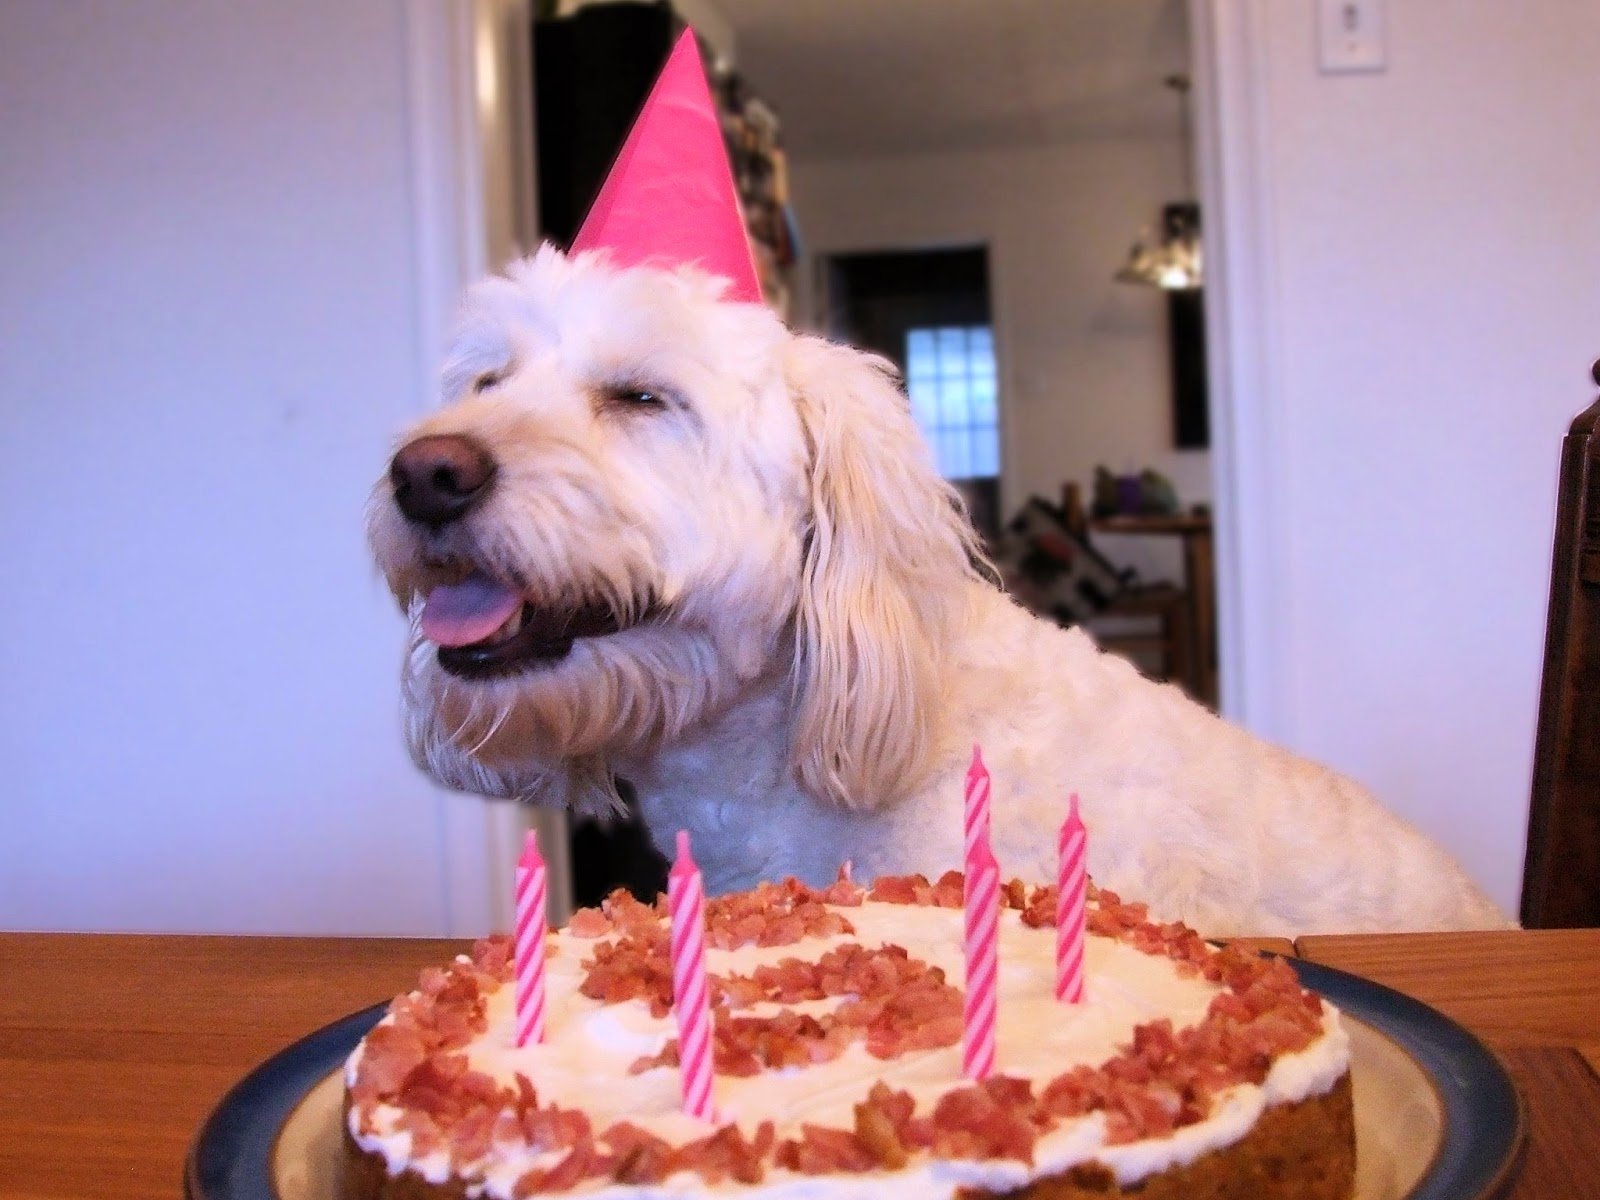 Rules of the Jungle: The big surprise: a dog birthday cake